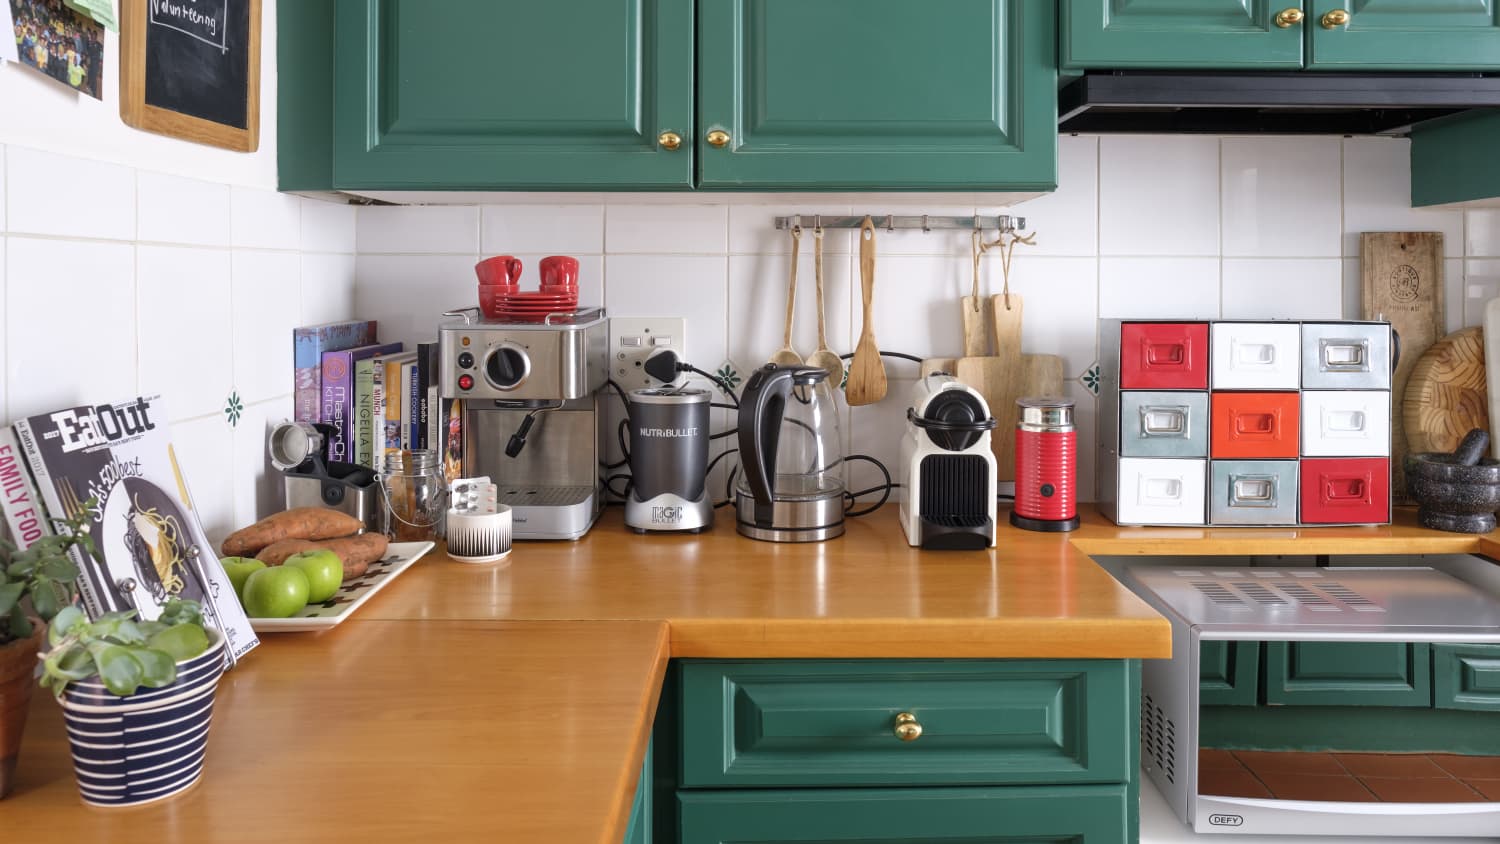 Bed Bath and Beyond sales: The best deals from Keurig, Magic